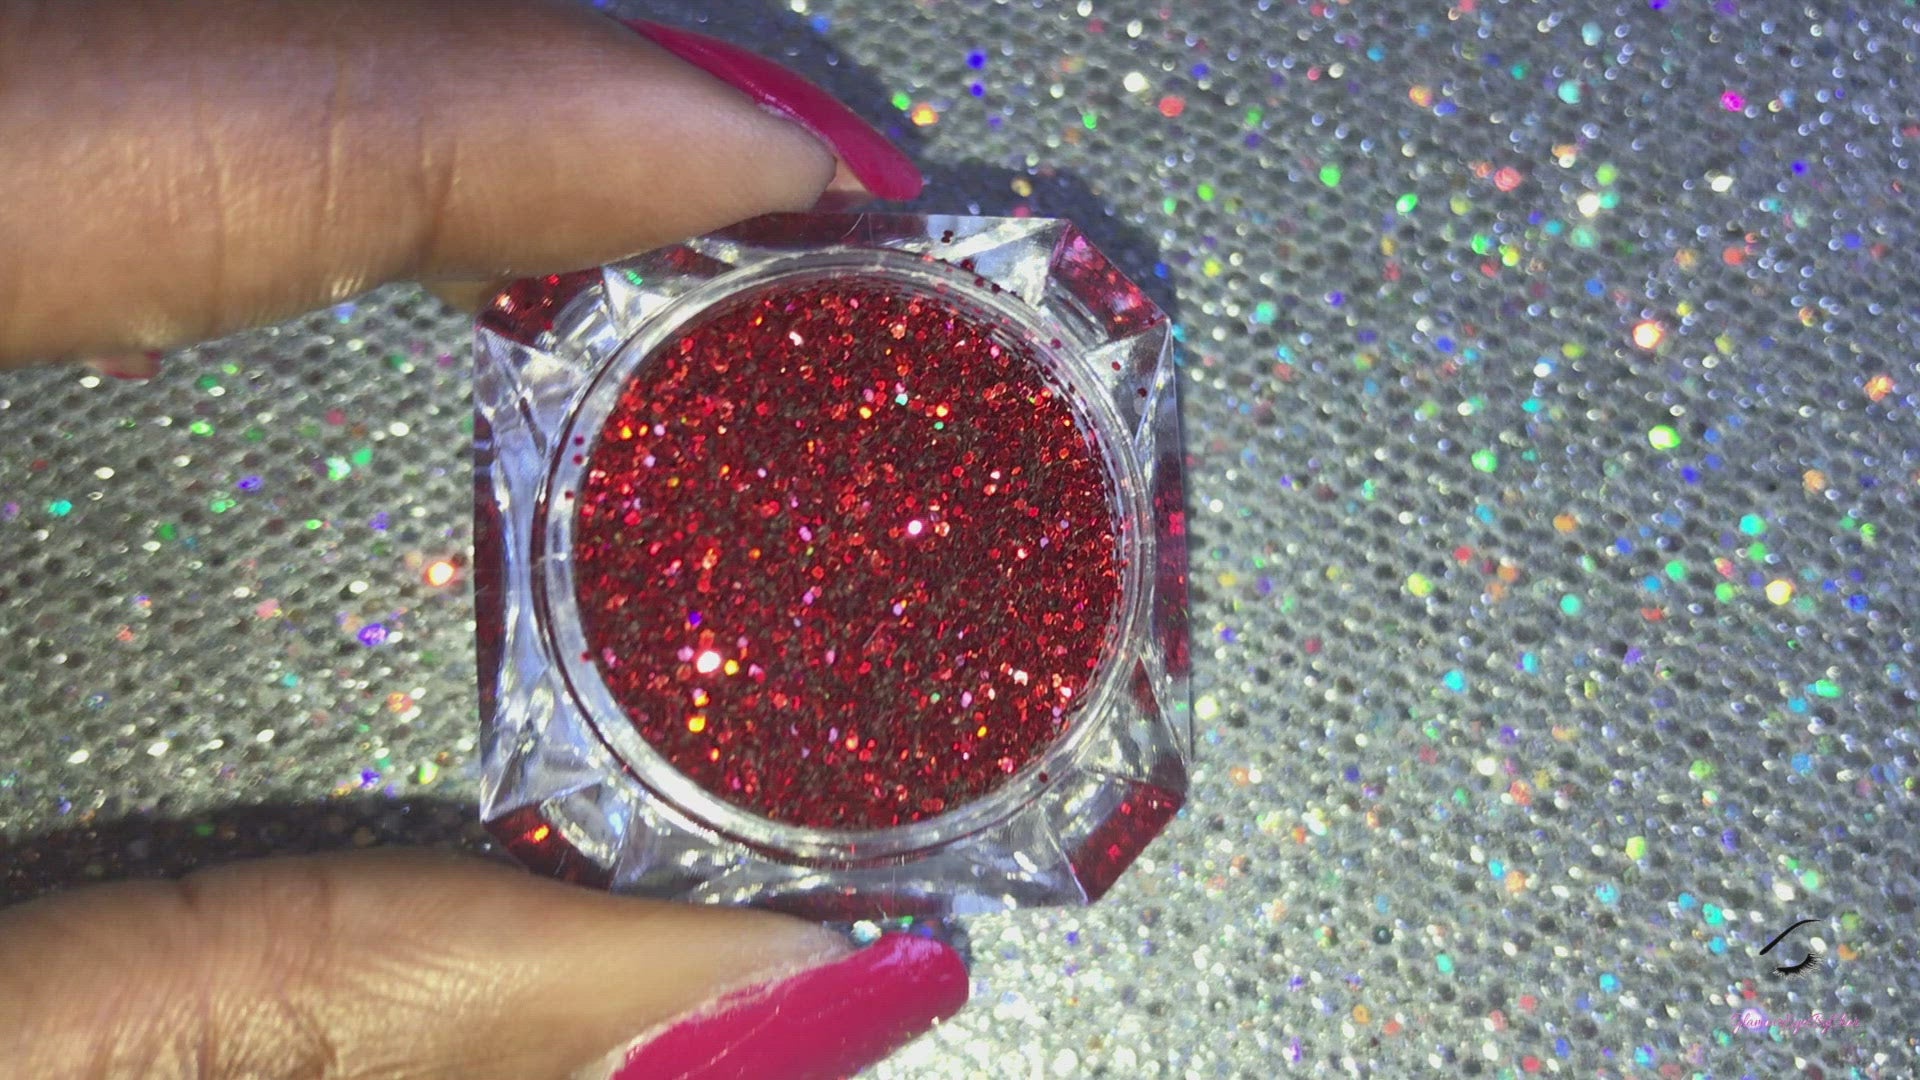 This glitter is called Candy Apple and is part of the simple glitter collection. It consists of a true candy apple red glitter. Candy Apple can be used for your face, body, hair and nails.